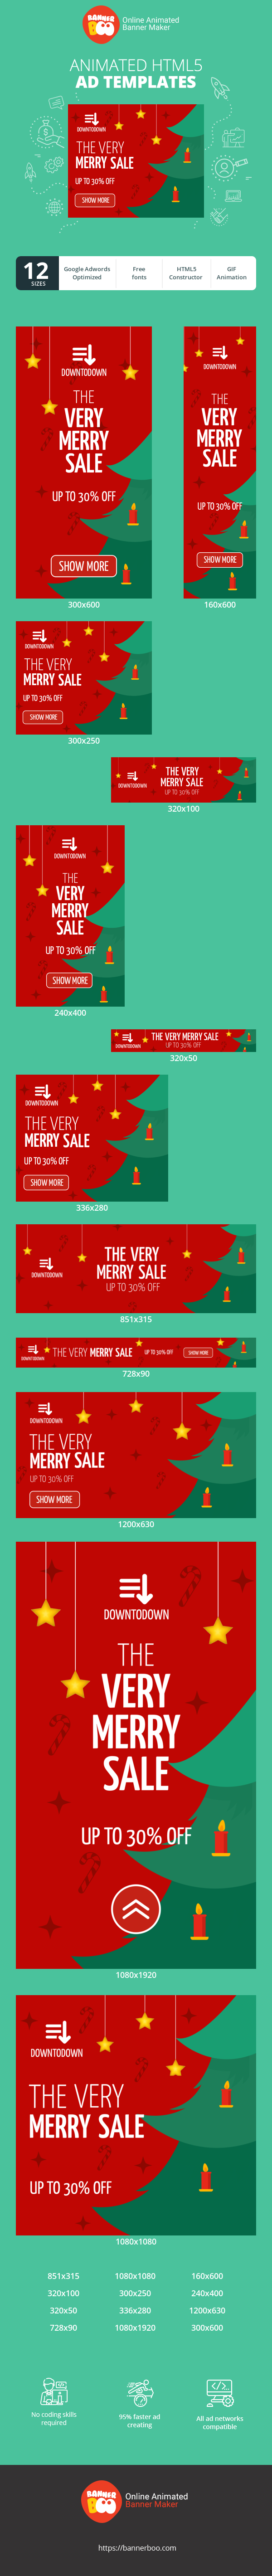 The Very Merry Sale — Up To 30% Off